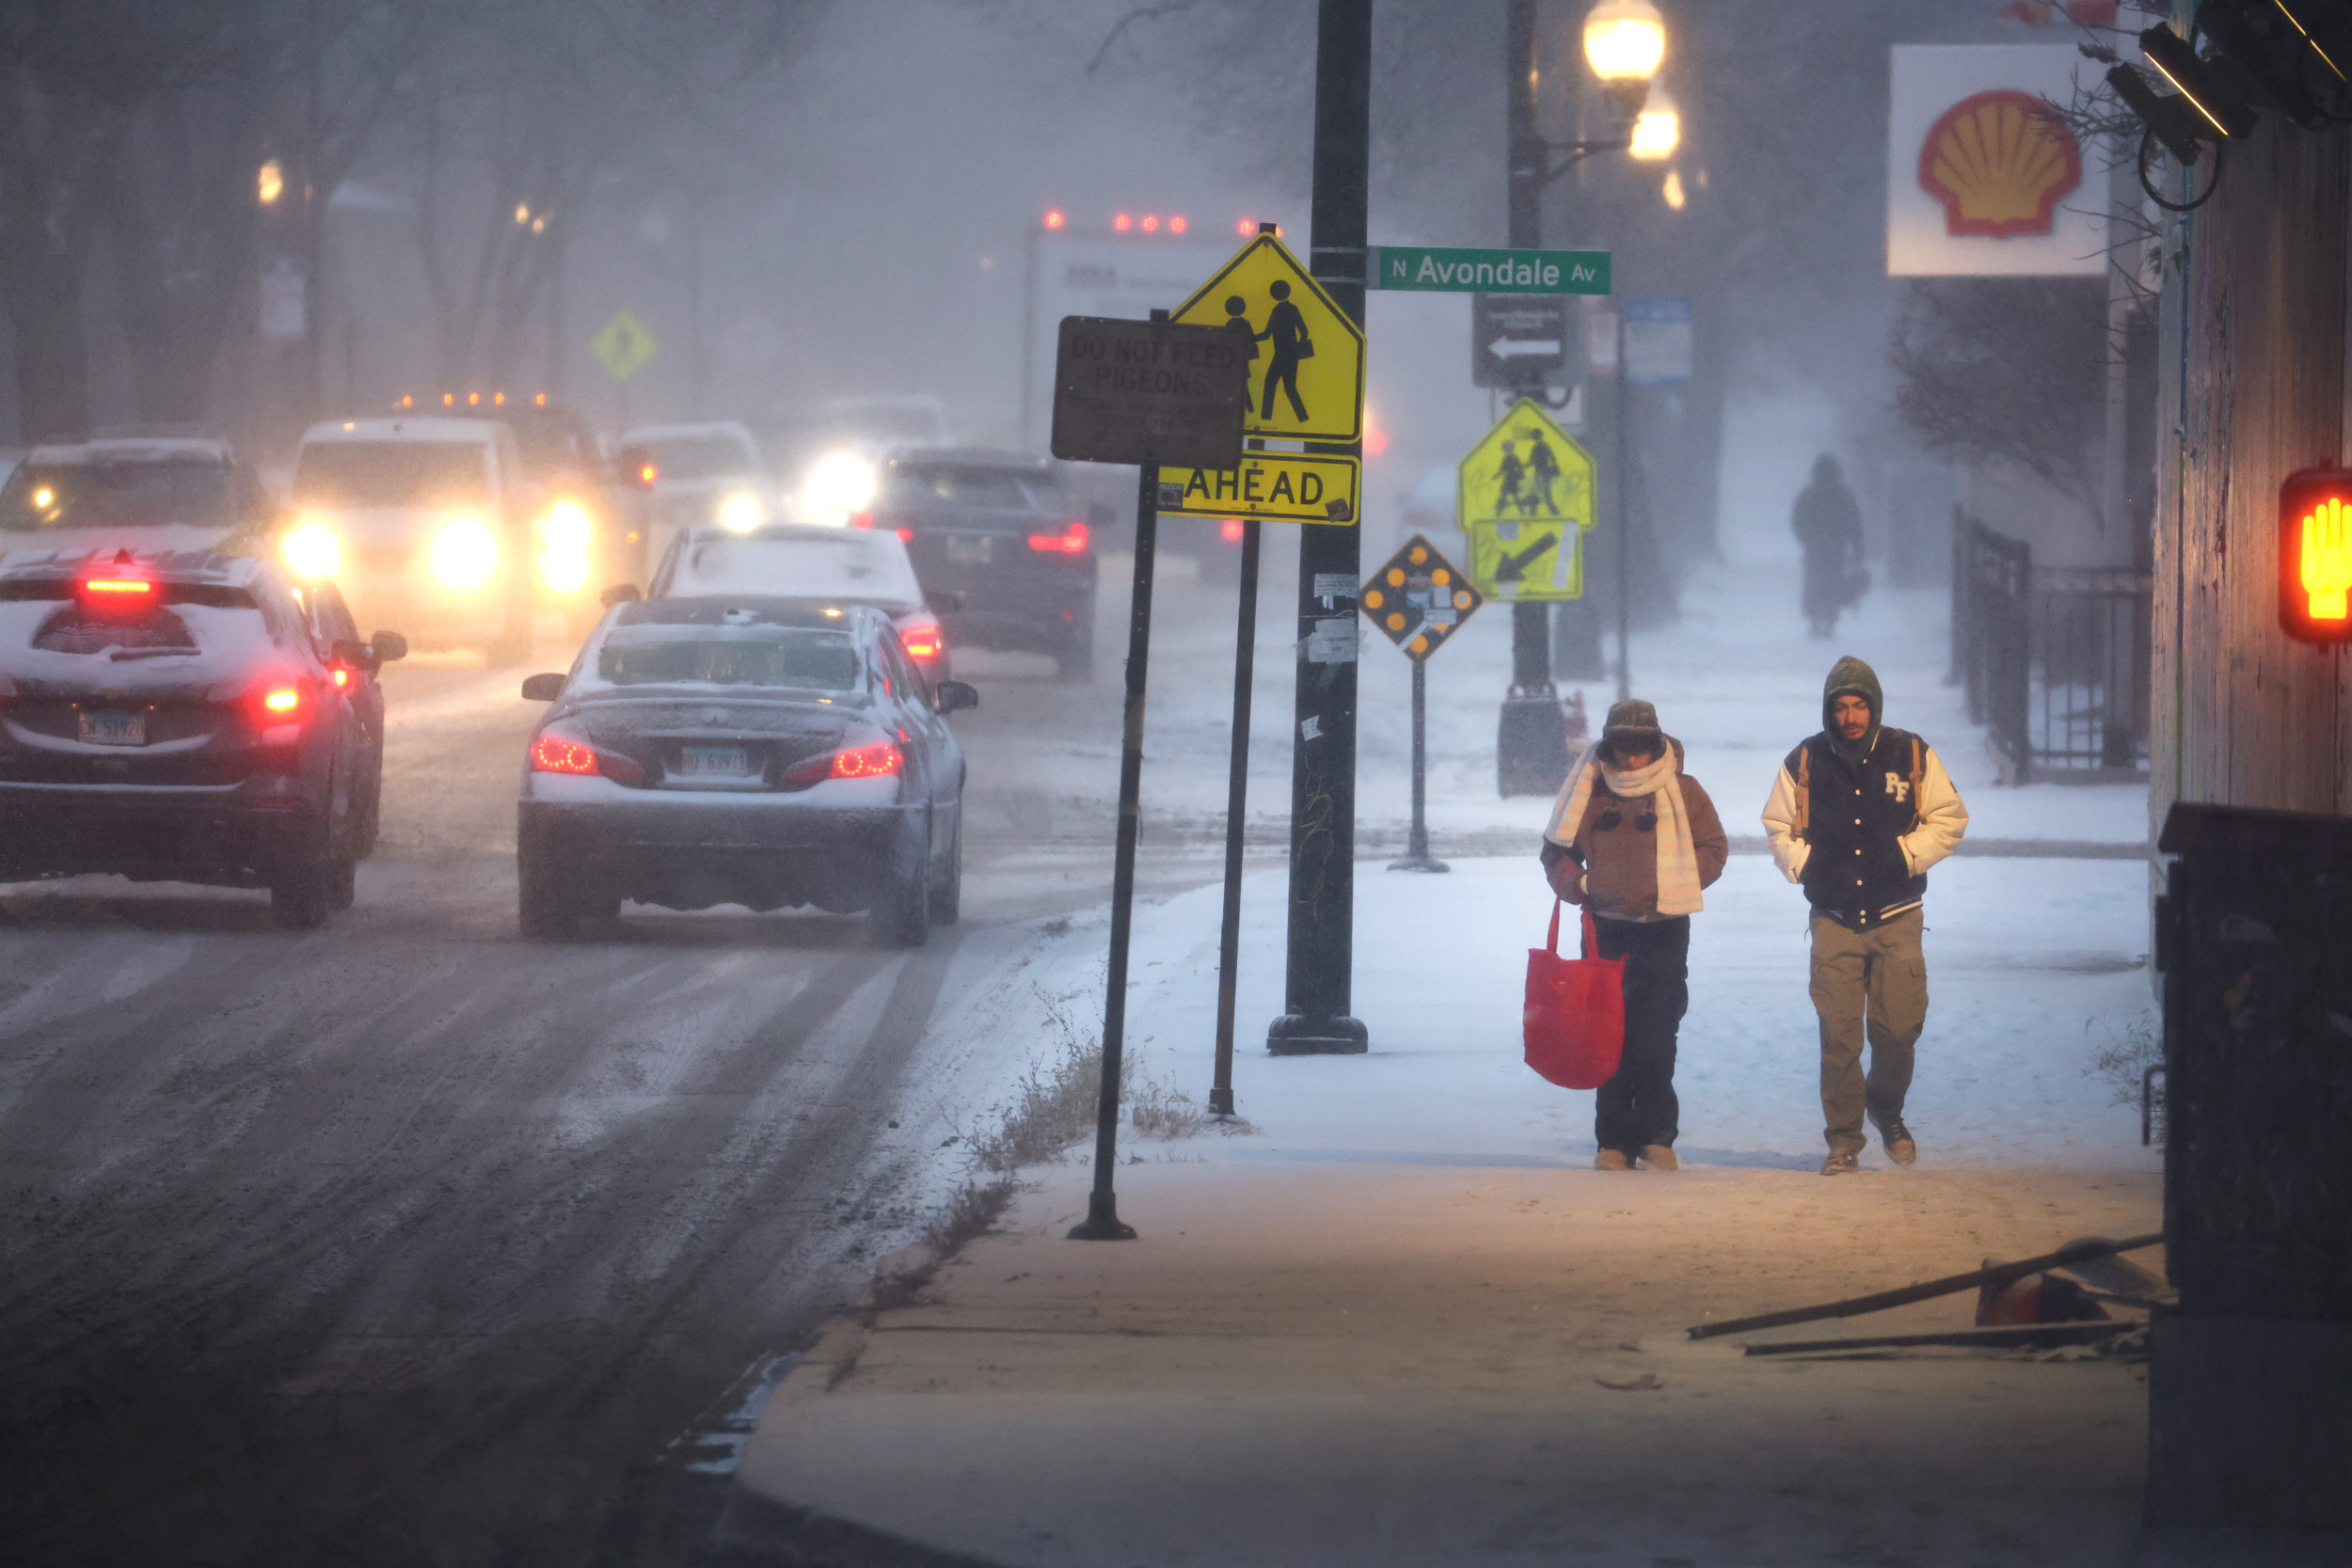 Arctic Blast Warning These Are the Coldest Cities in the U.S. Right Now